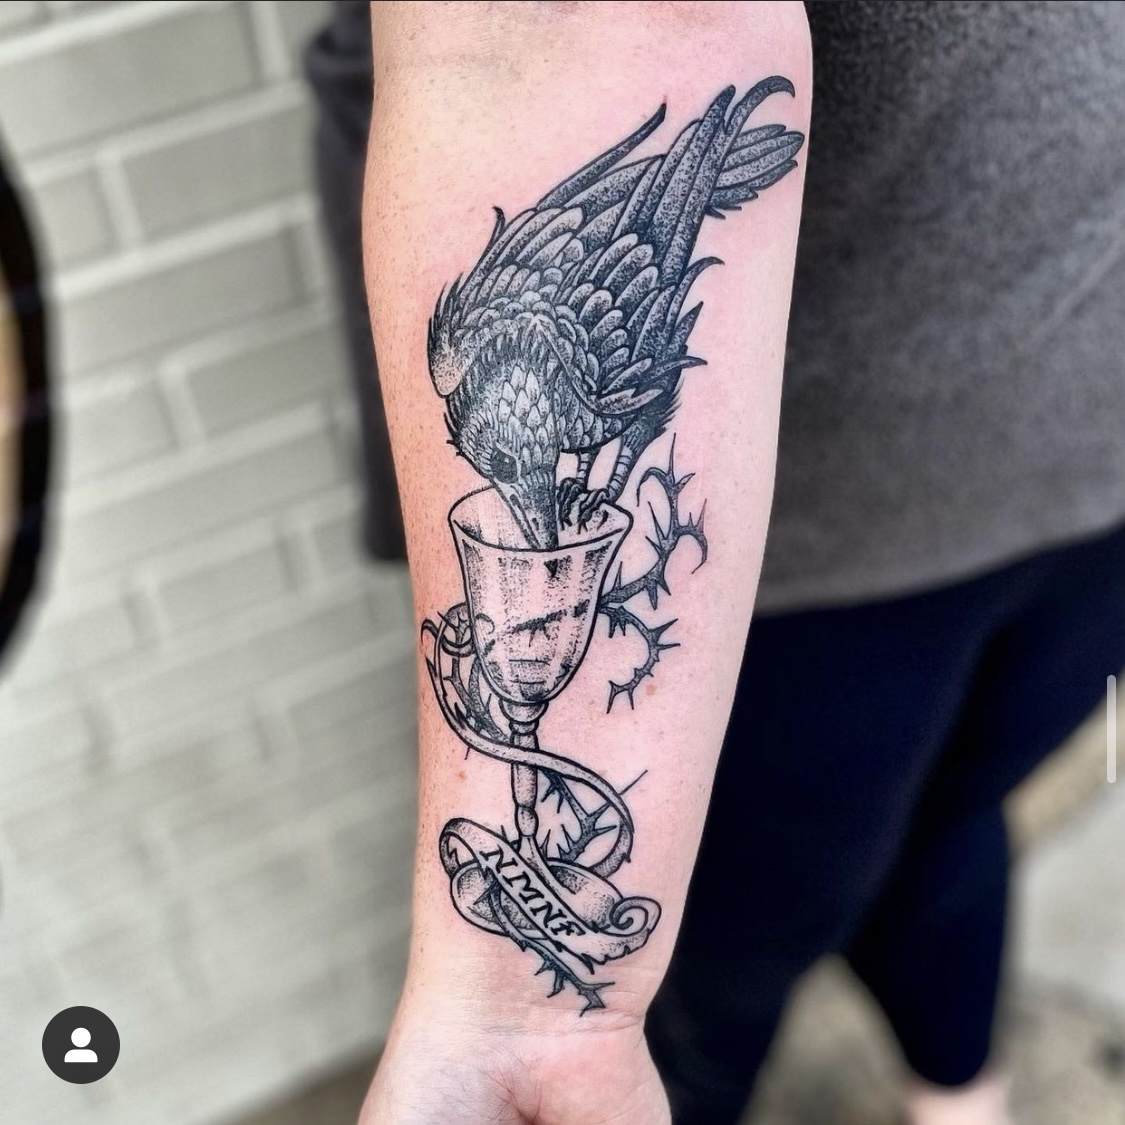 Tattoo of a crow and a cup from top Dallas tattoo artist